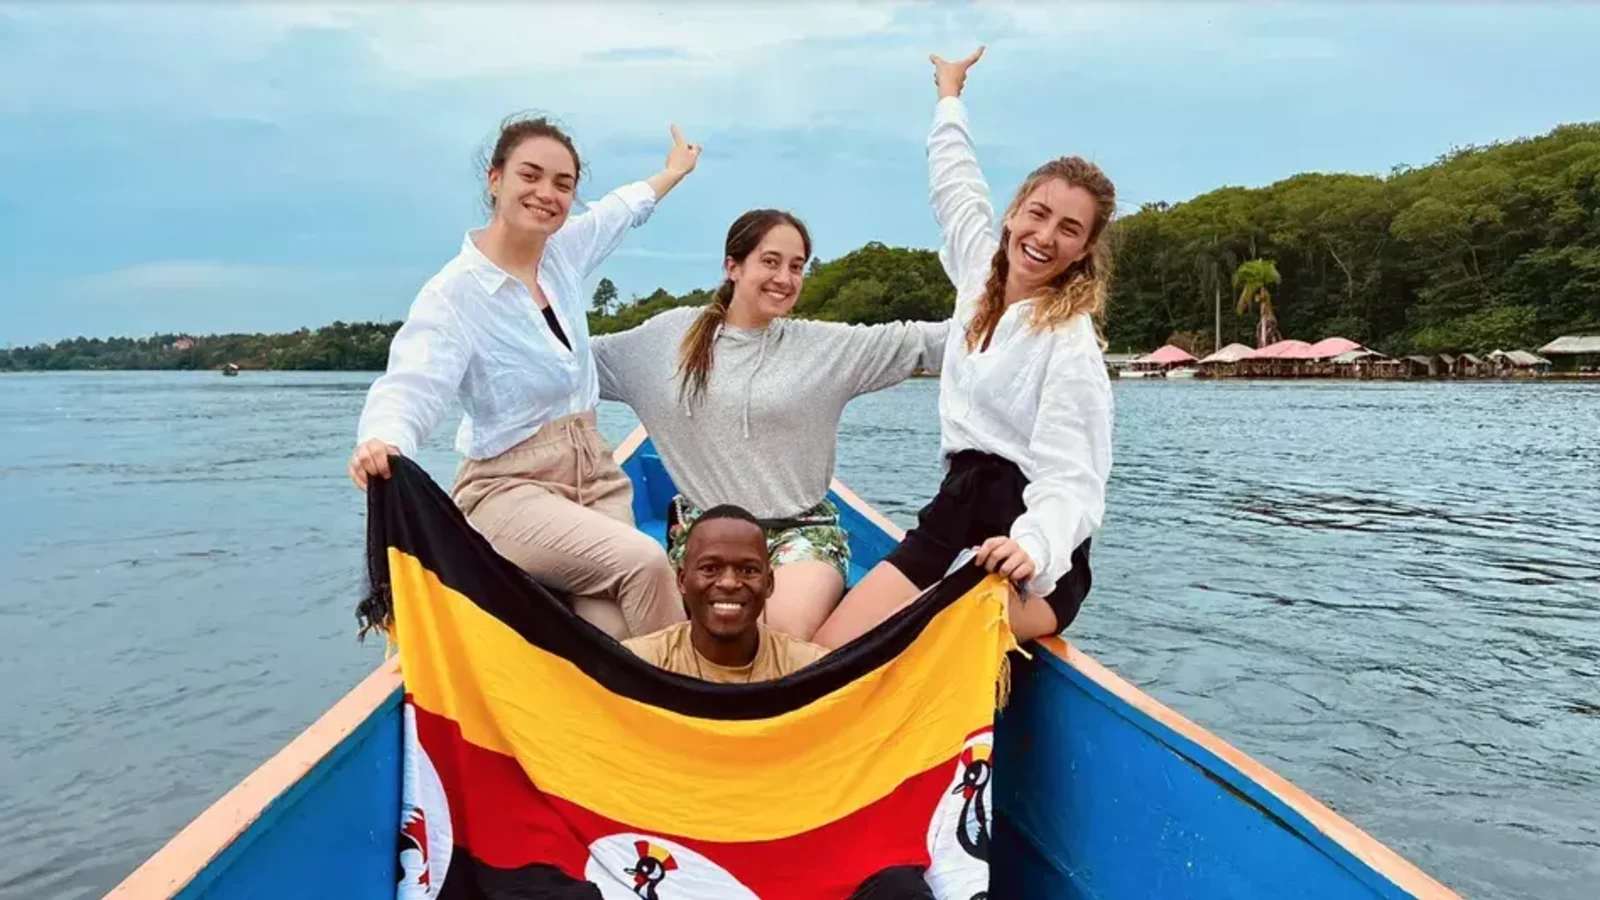 Gary Simon in boat with clients, Uganda